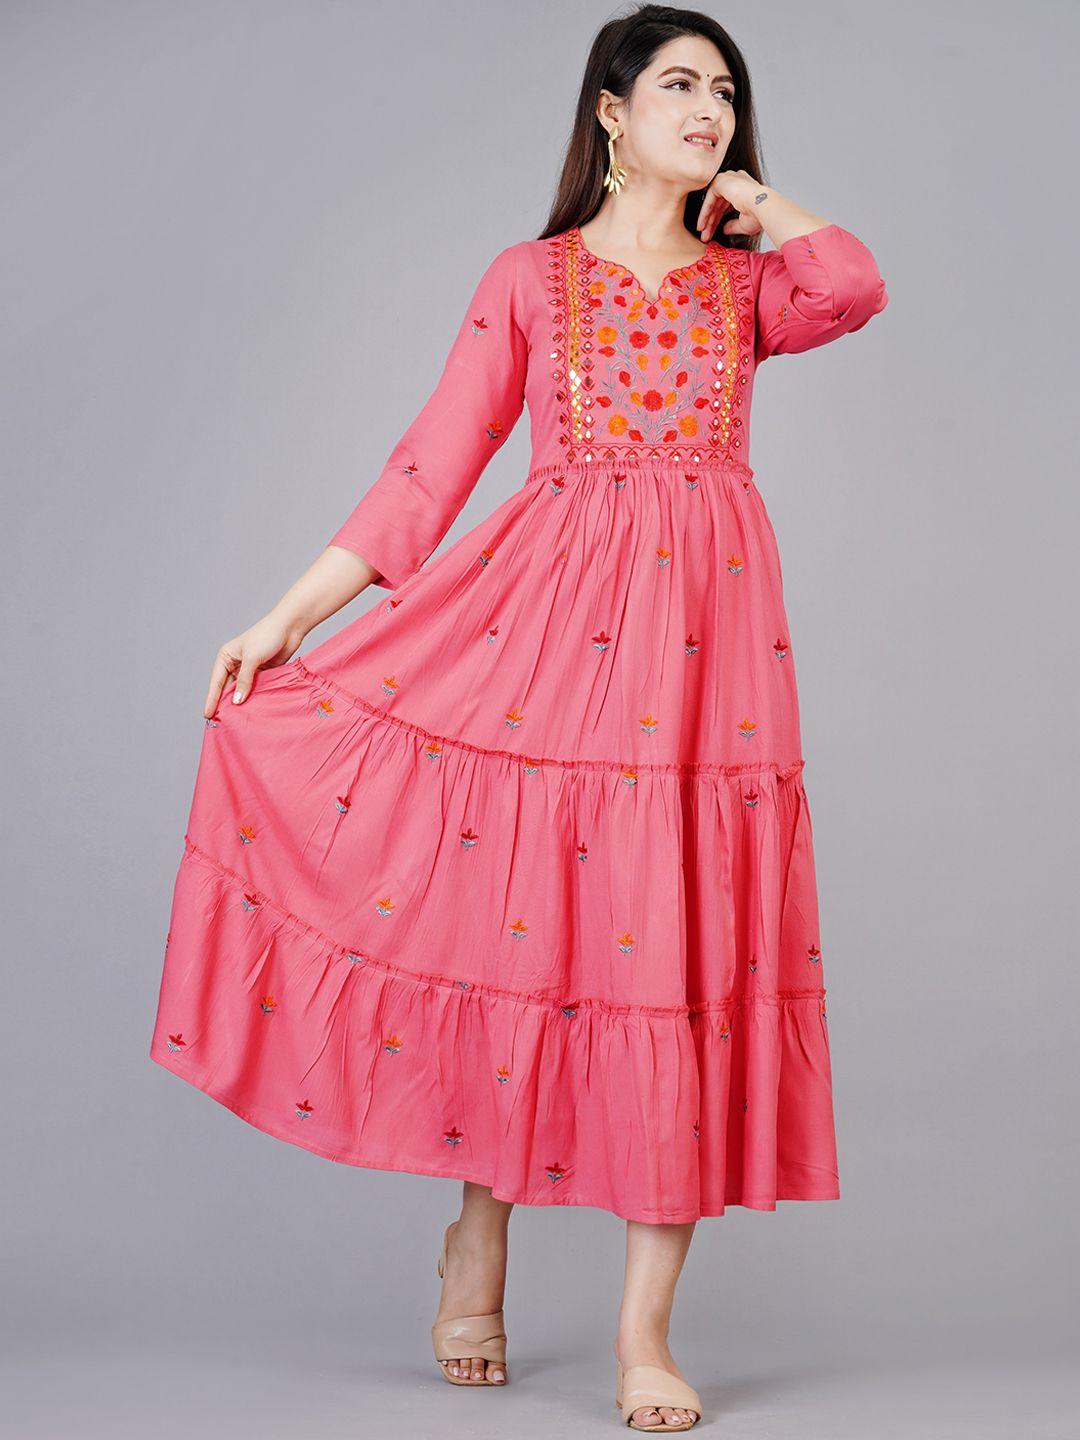 ao services floral embroidered v-neck gathered detailed a-line ethnic dress